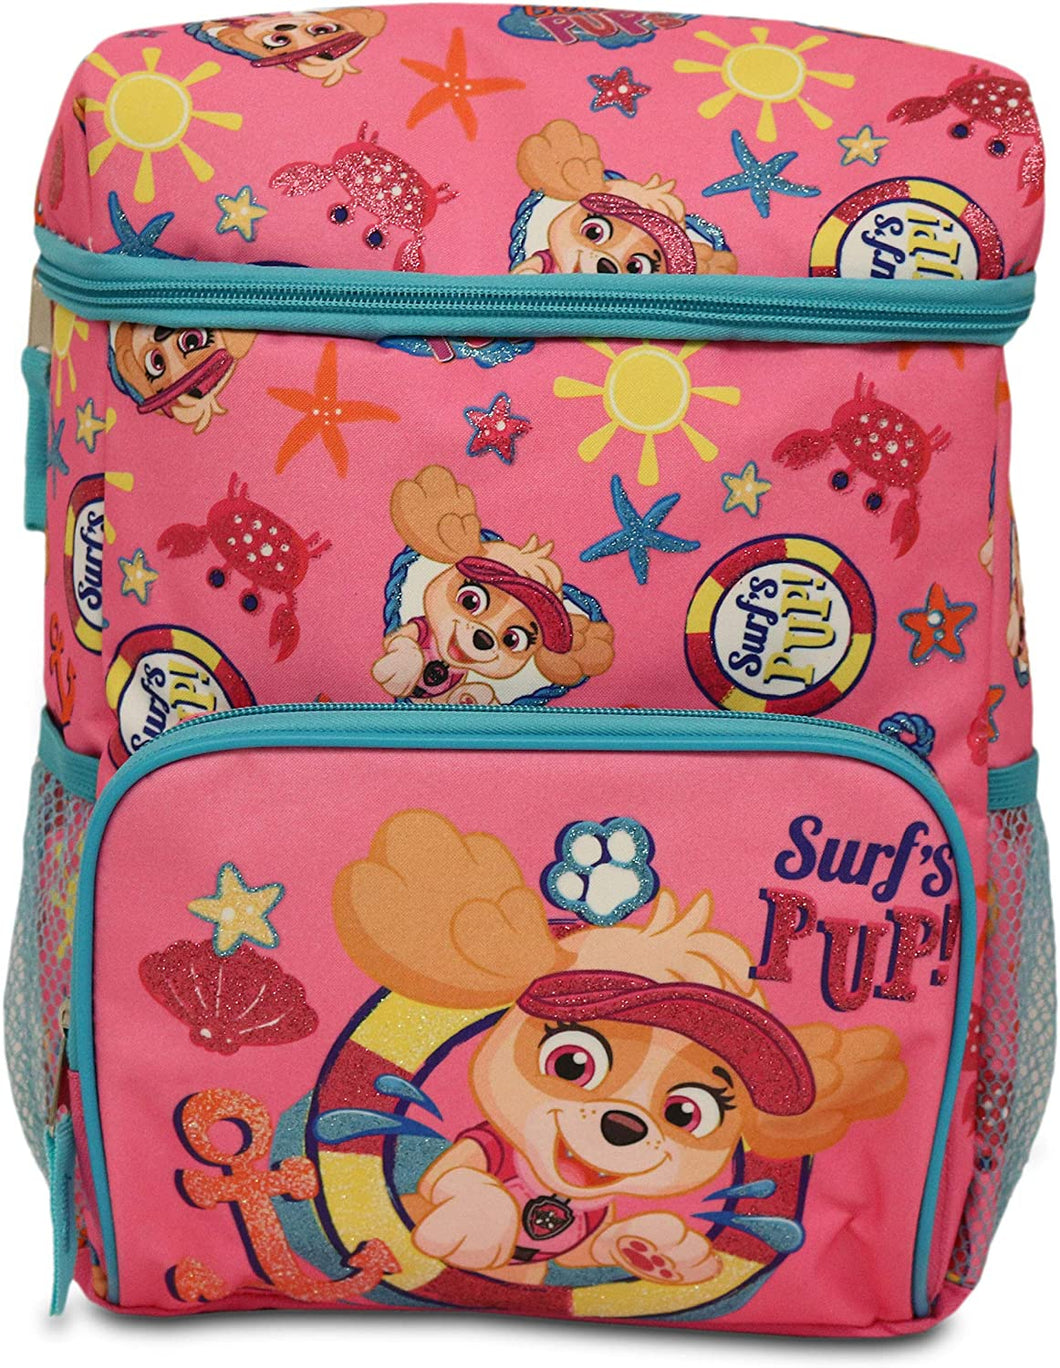 Paw Patrol Surf's PUP! Insulated Cooler Backpack